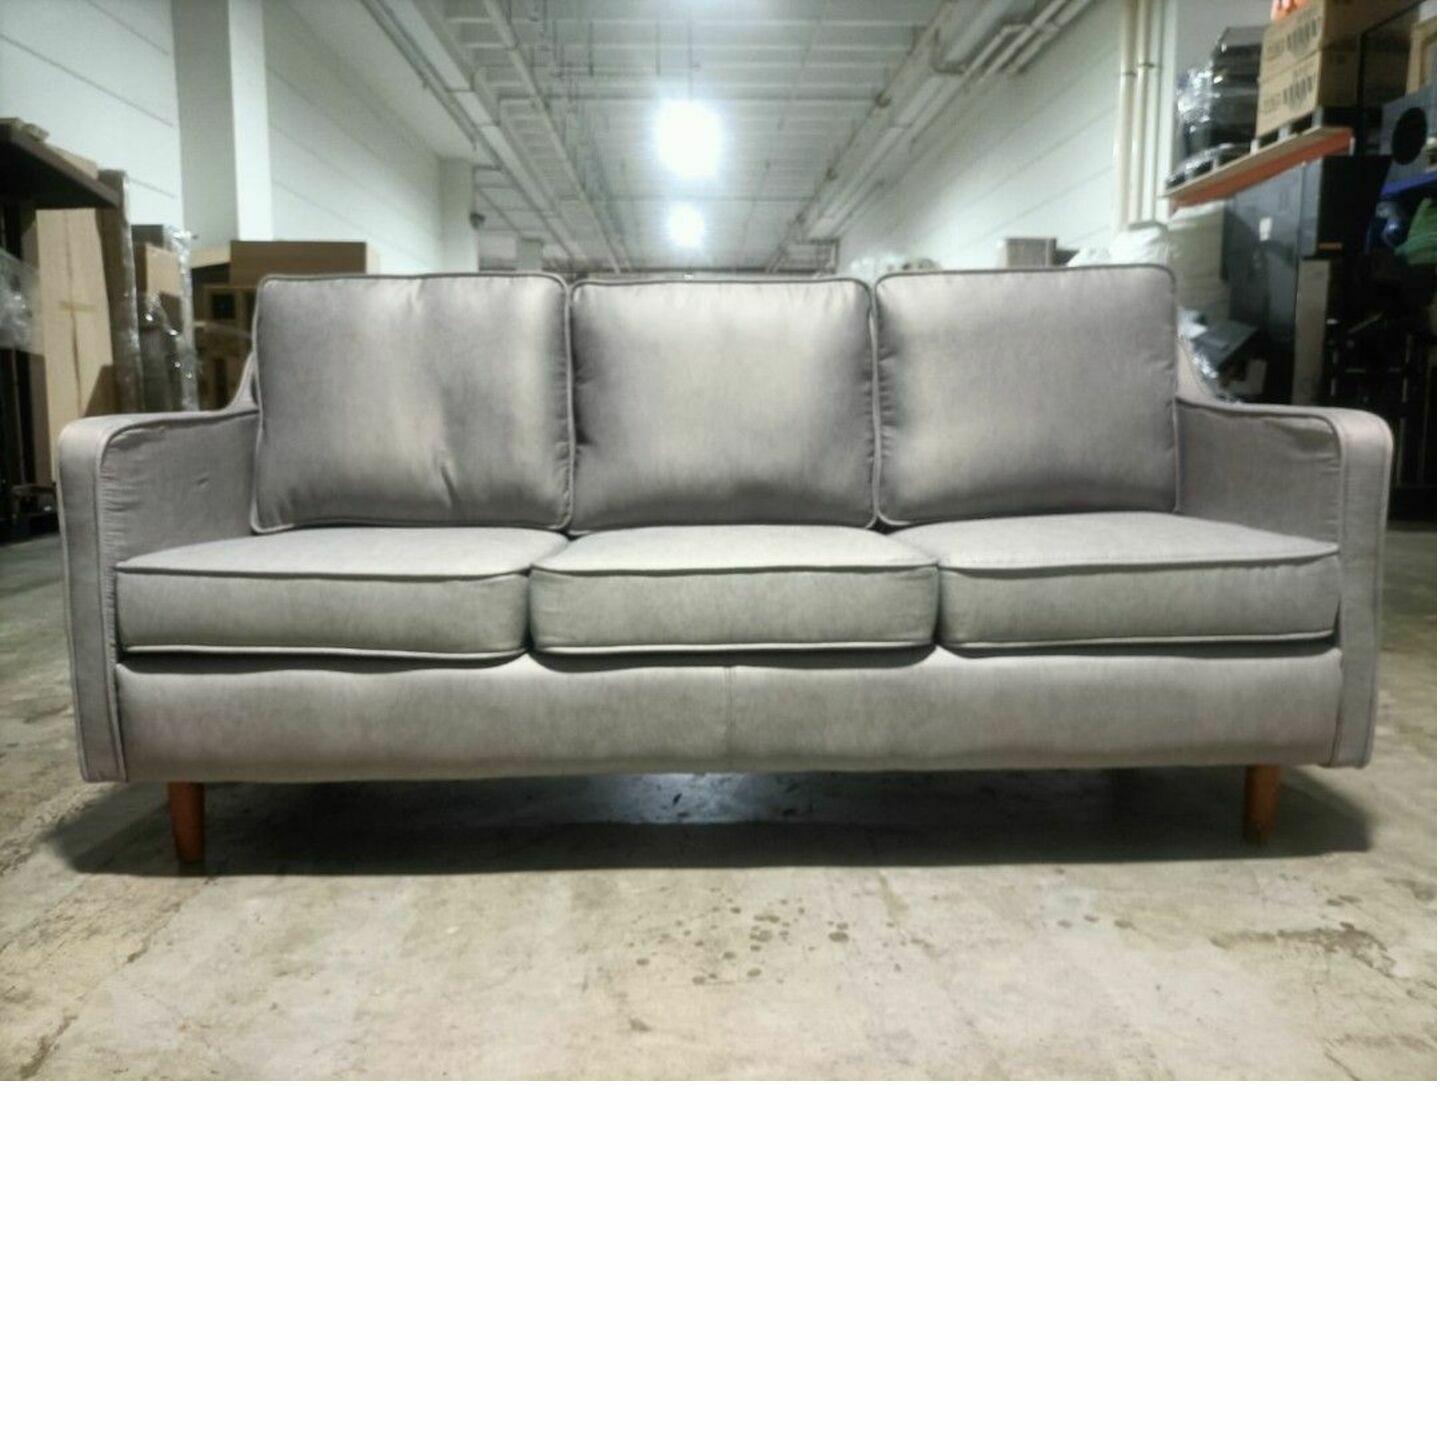 PRE ORDER CAT FRIENDLY VALENTE DESIGNS 3 Seater Sofa in QUARRY GREY TECH LEATHAIRE - Estimated Delivery by End of July 2023